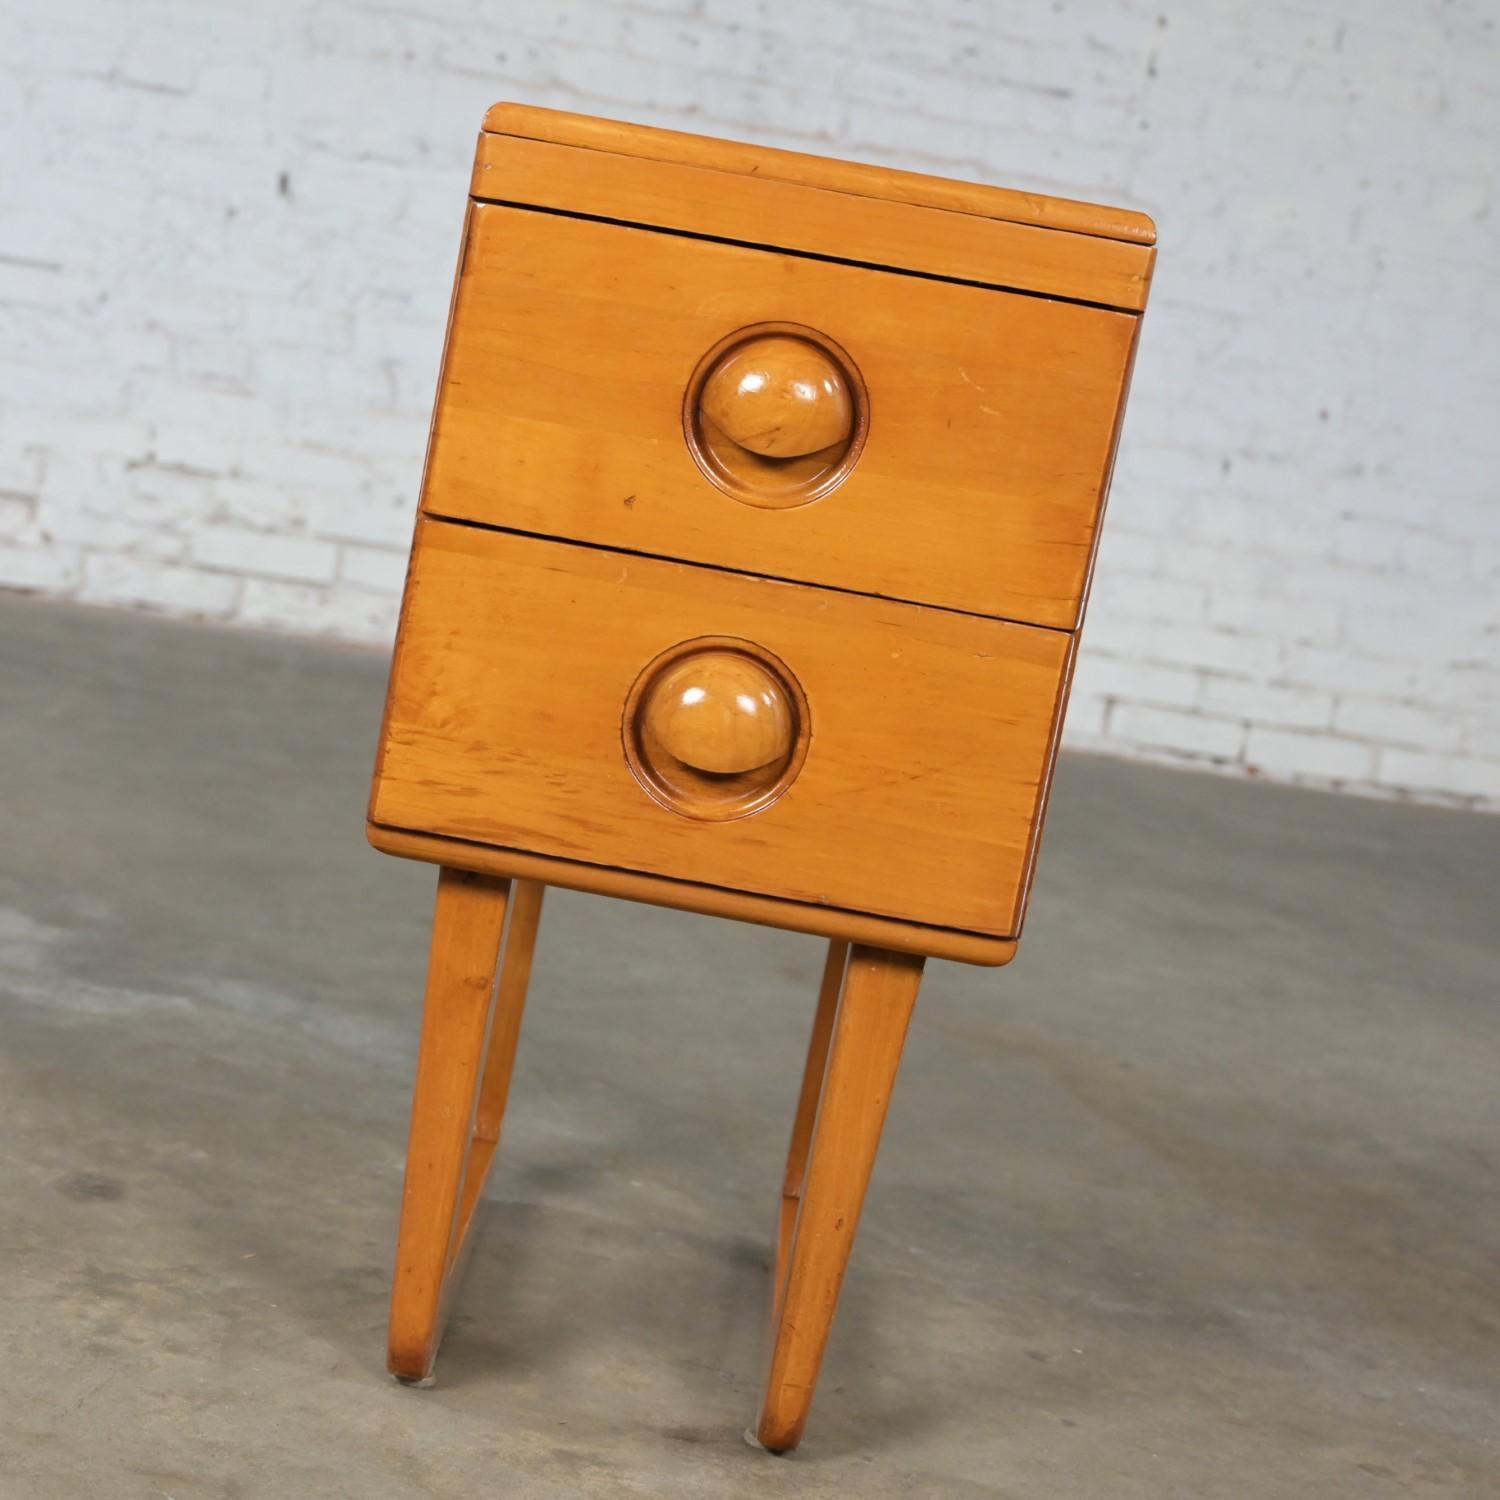 Wonderful Early to Mid-20th Century Art Moderne solid maple 2 drawer nightstand in the style of Bissman and after Russel Wright for Conant Ball. This piece has been attributed based upon archived research including online sources, vintage